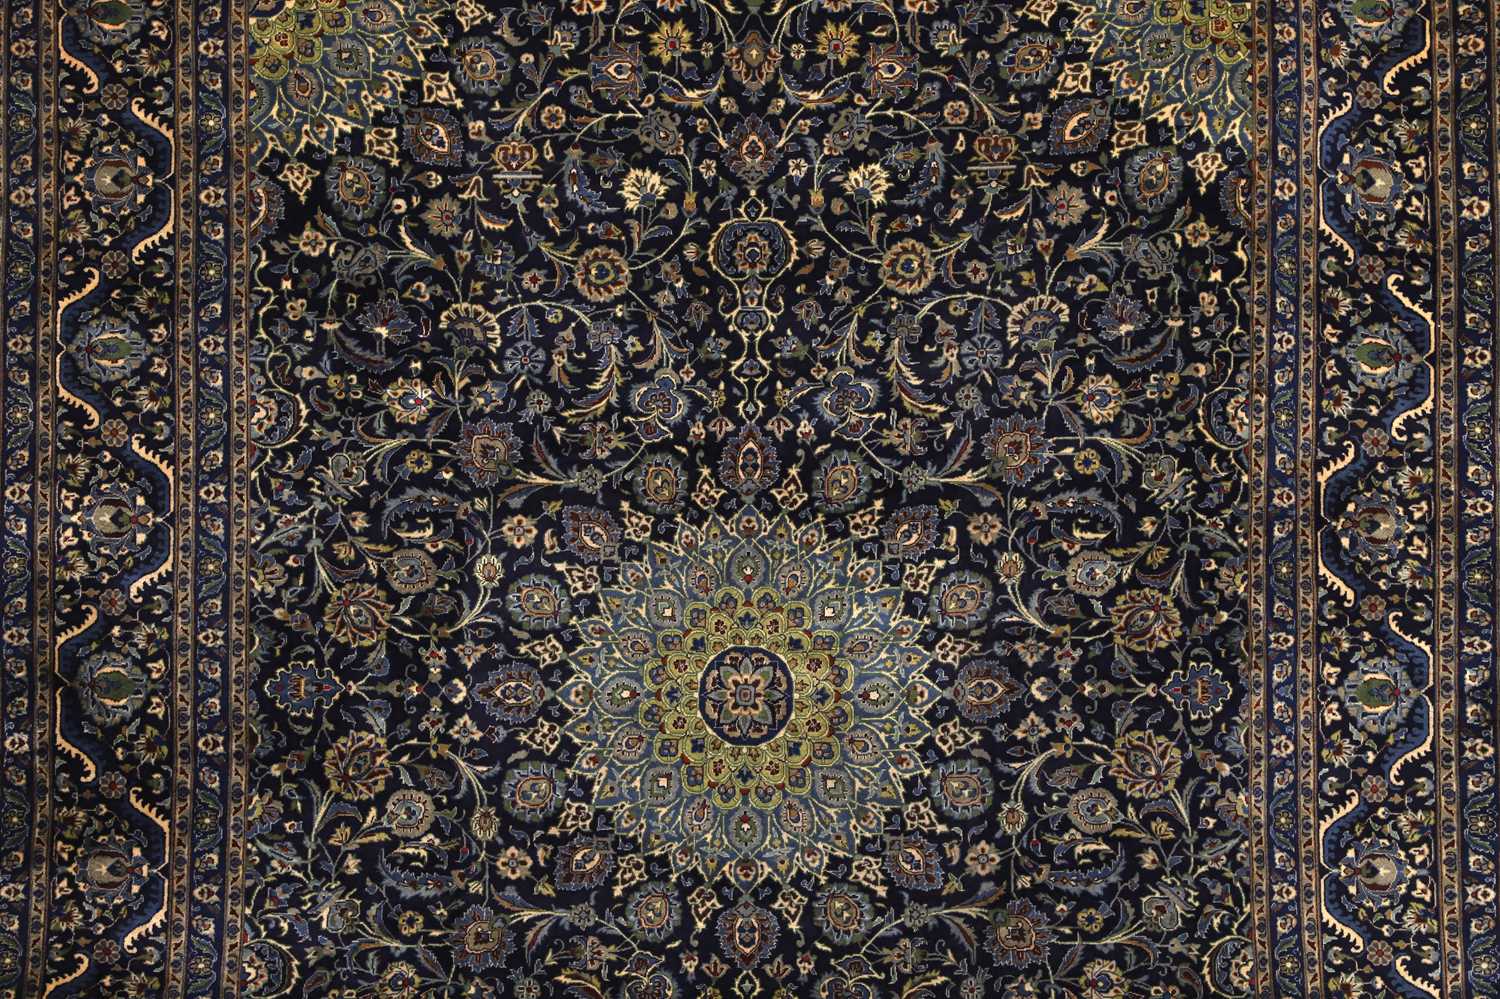 A Meshed carpet, - Image 29 of 30